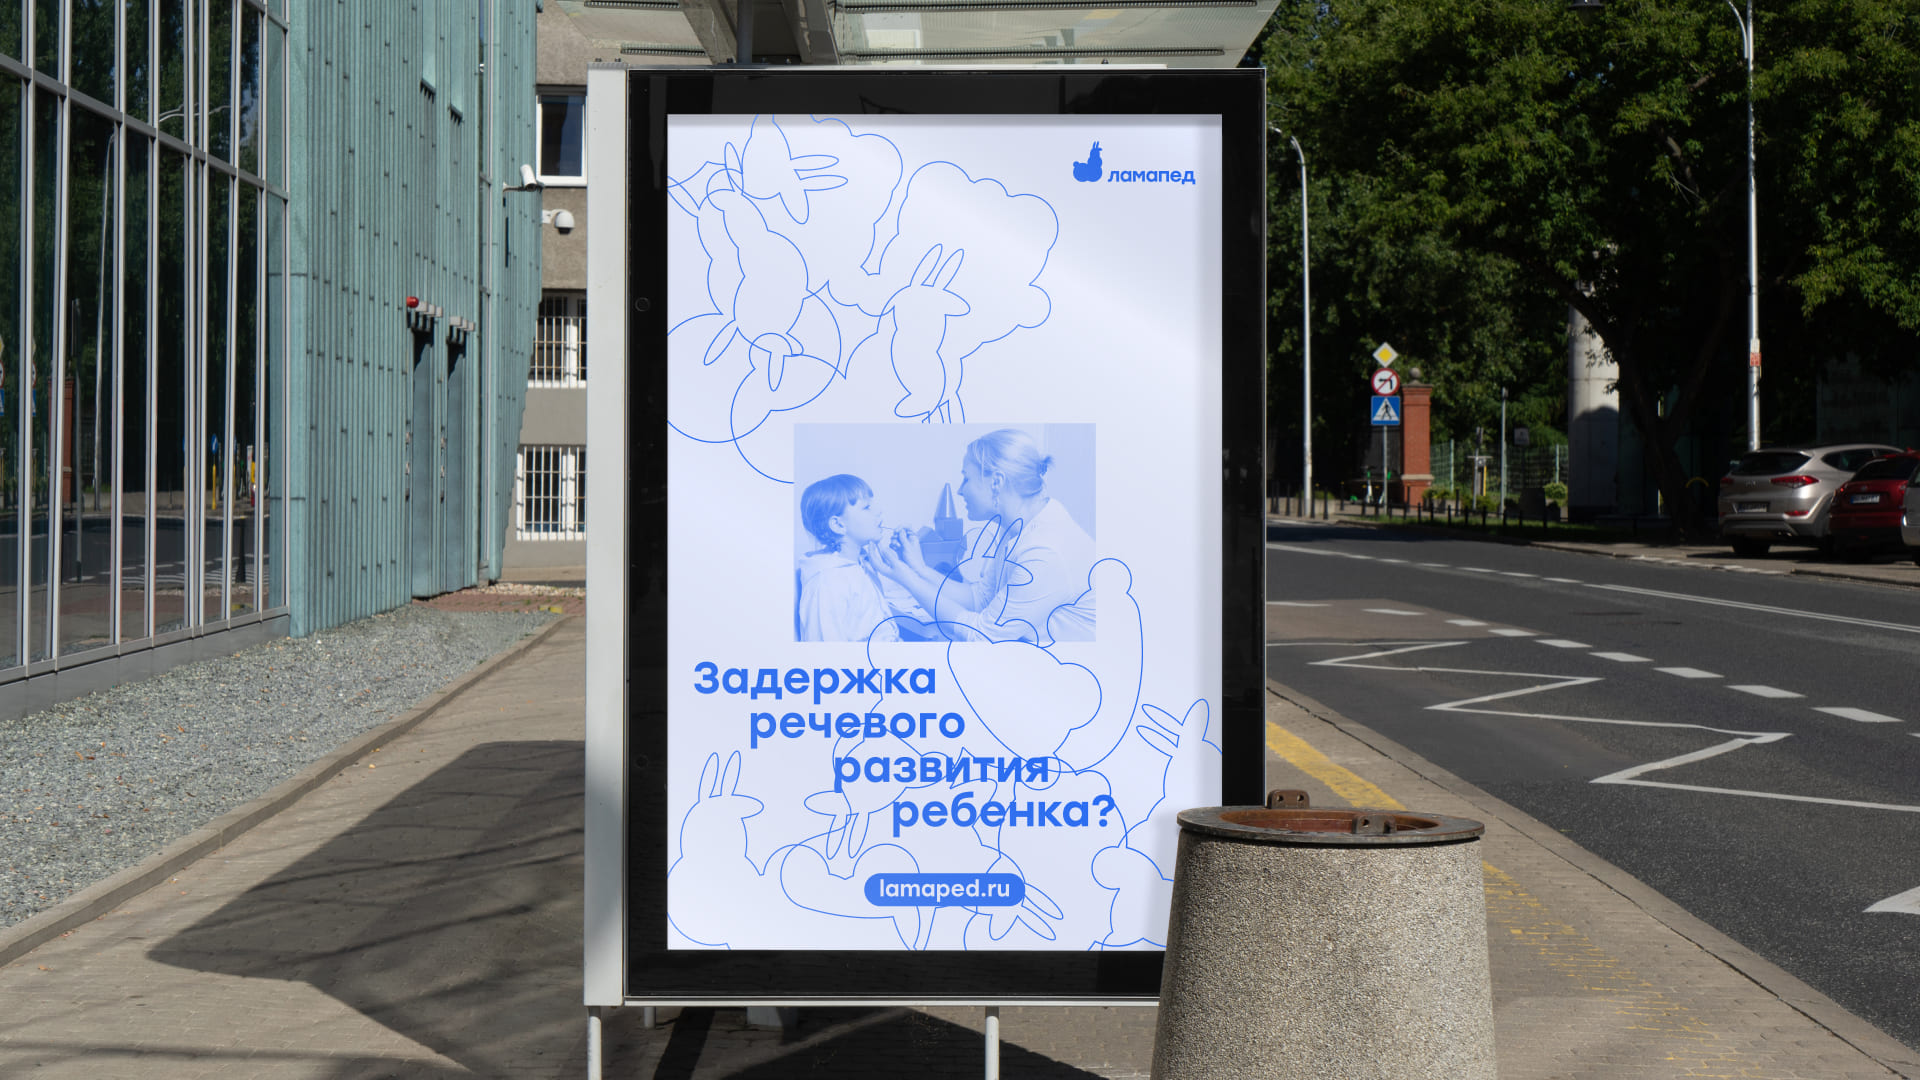 Brand Identity of Speech Therapy Room Lamaped, Designed by Ivan Polysaev